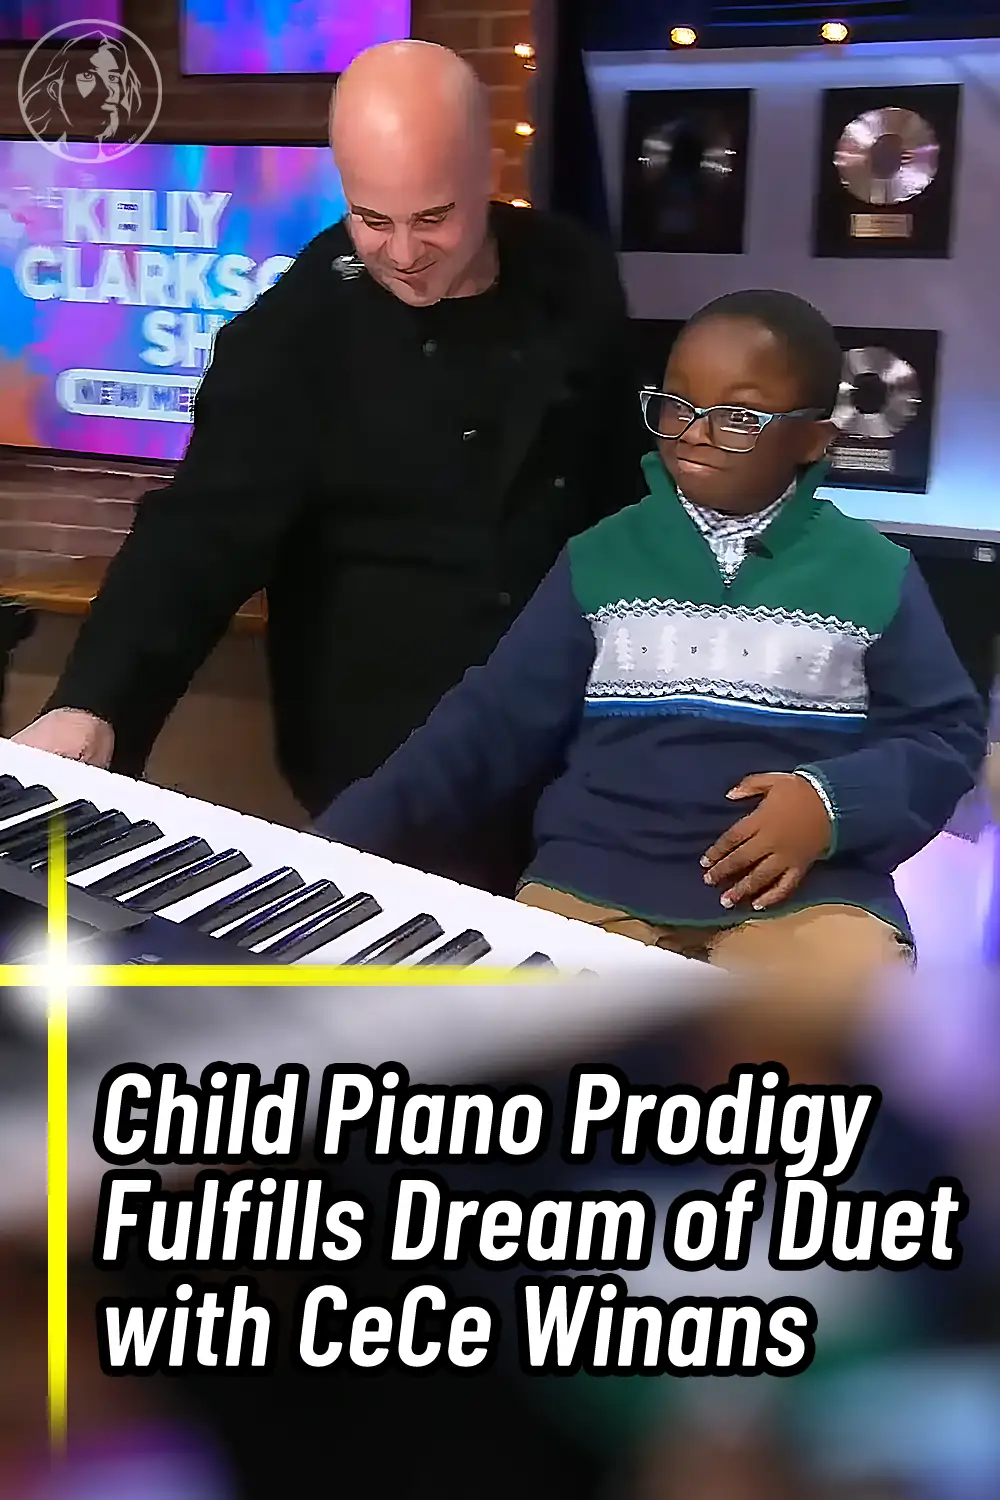 Child Piano Prodigy Fulfills Dream of Duet with CeCe Winans